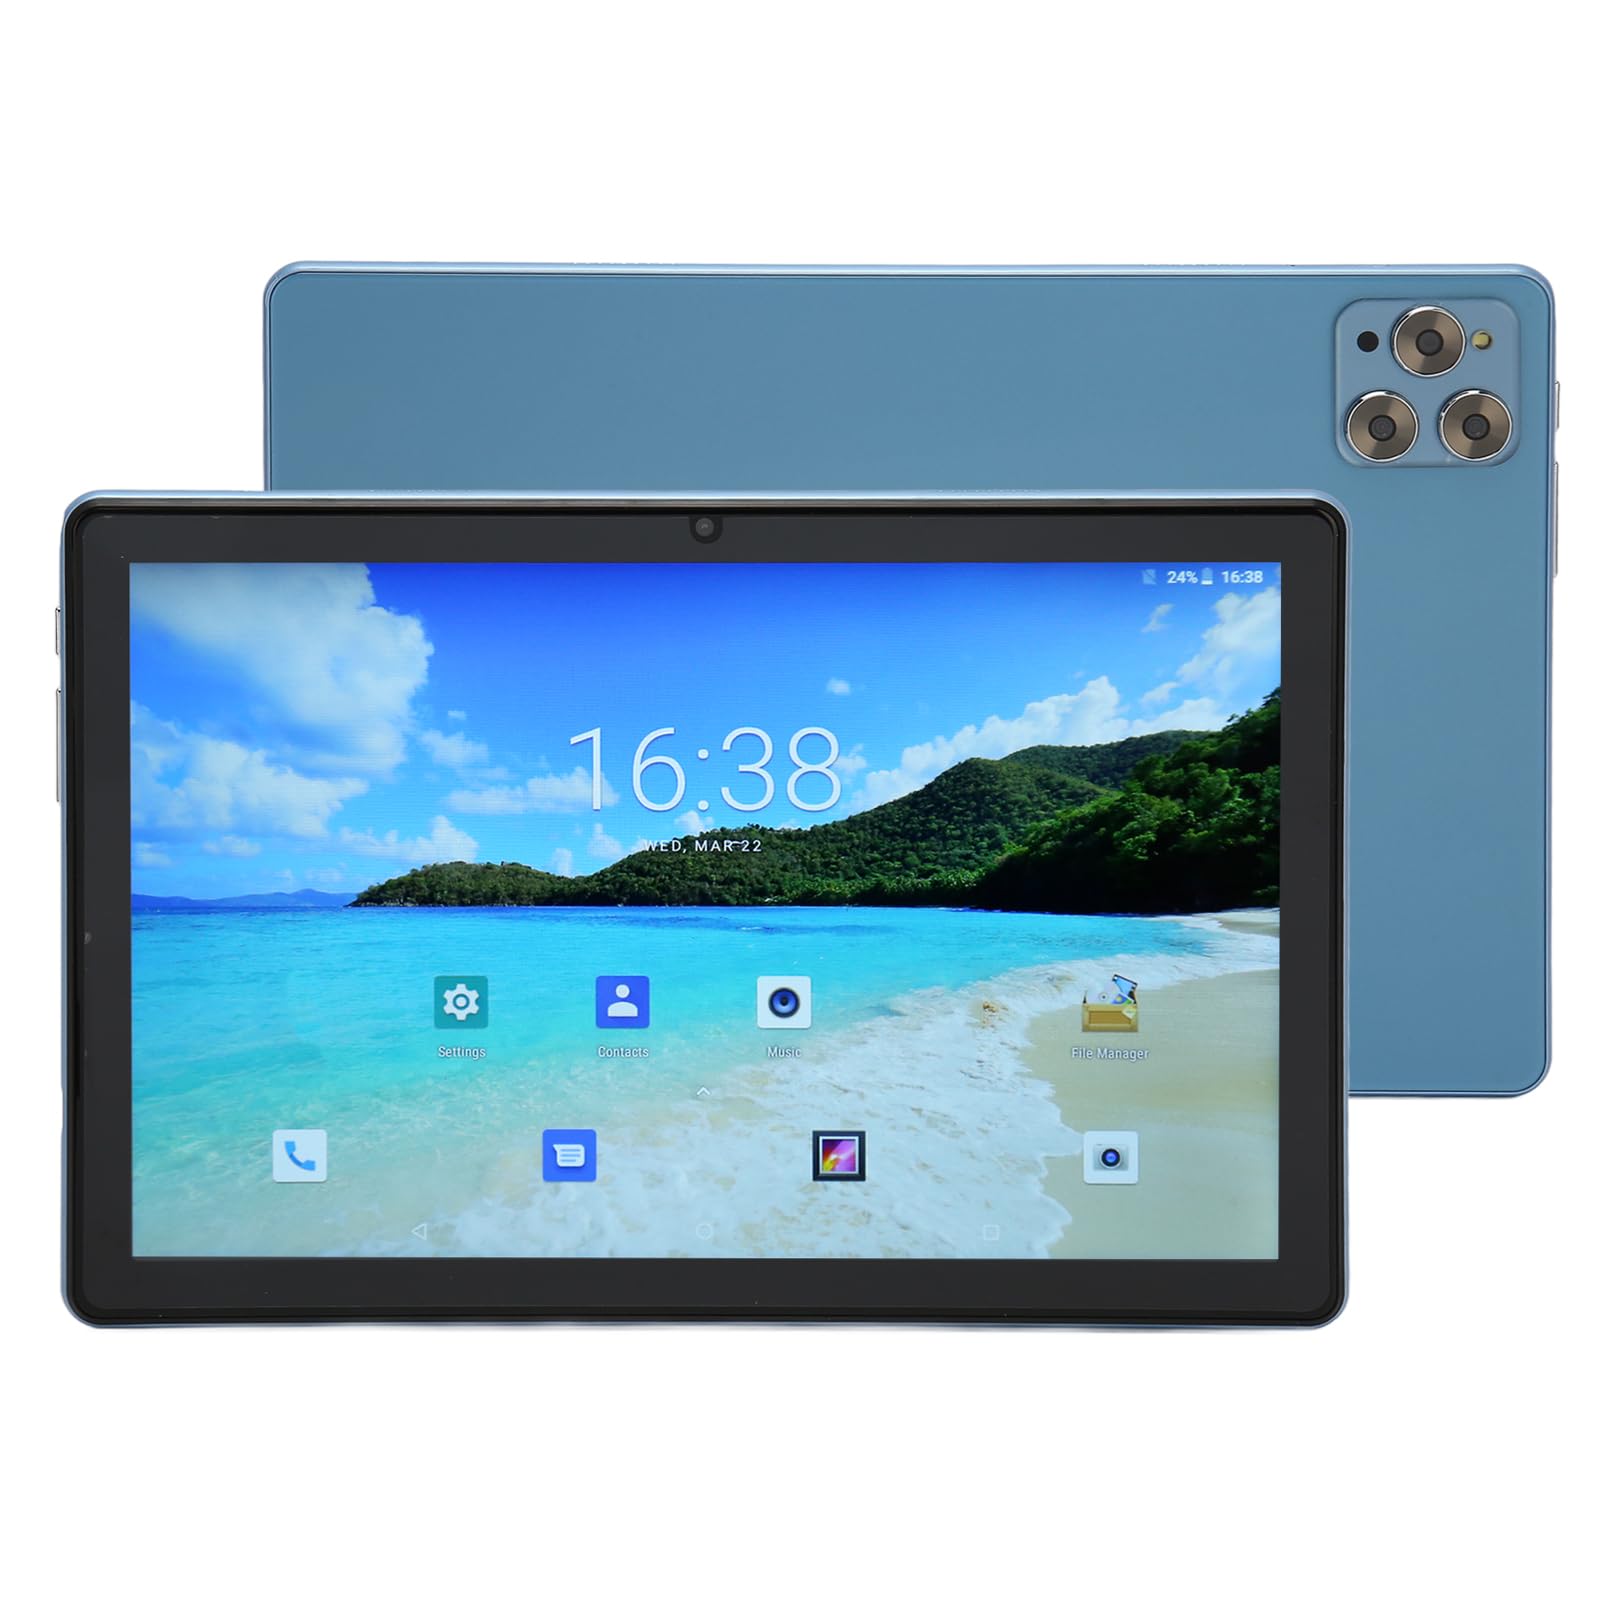 FOLOSAFENAR Gaming Tablet, 8MP 16MP Camera 4G LTE 5G WiFi Octa Core CPU Office Tablet 10.1in FHD for Business (US Plug)